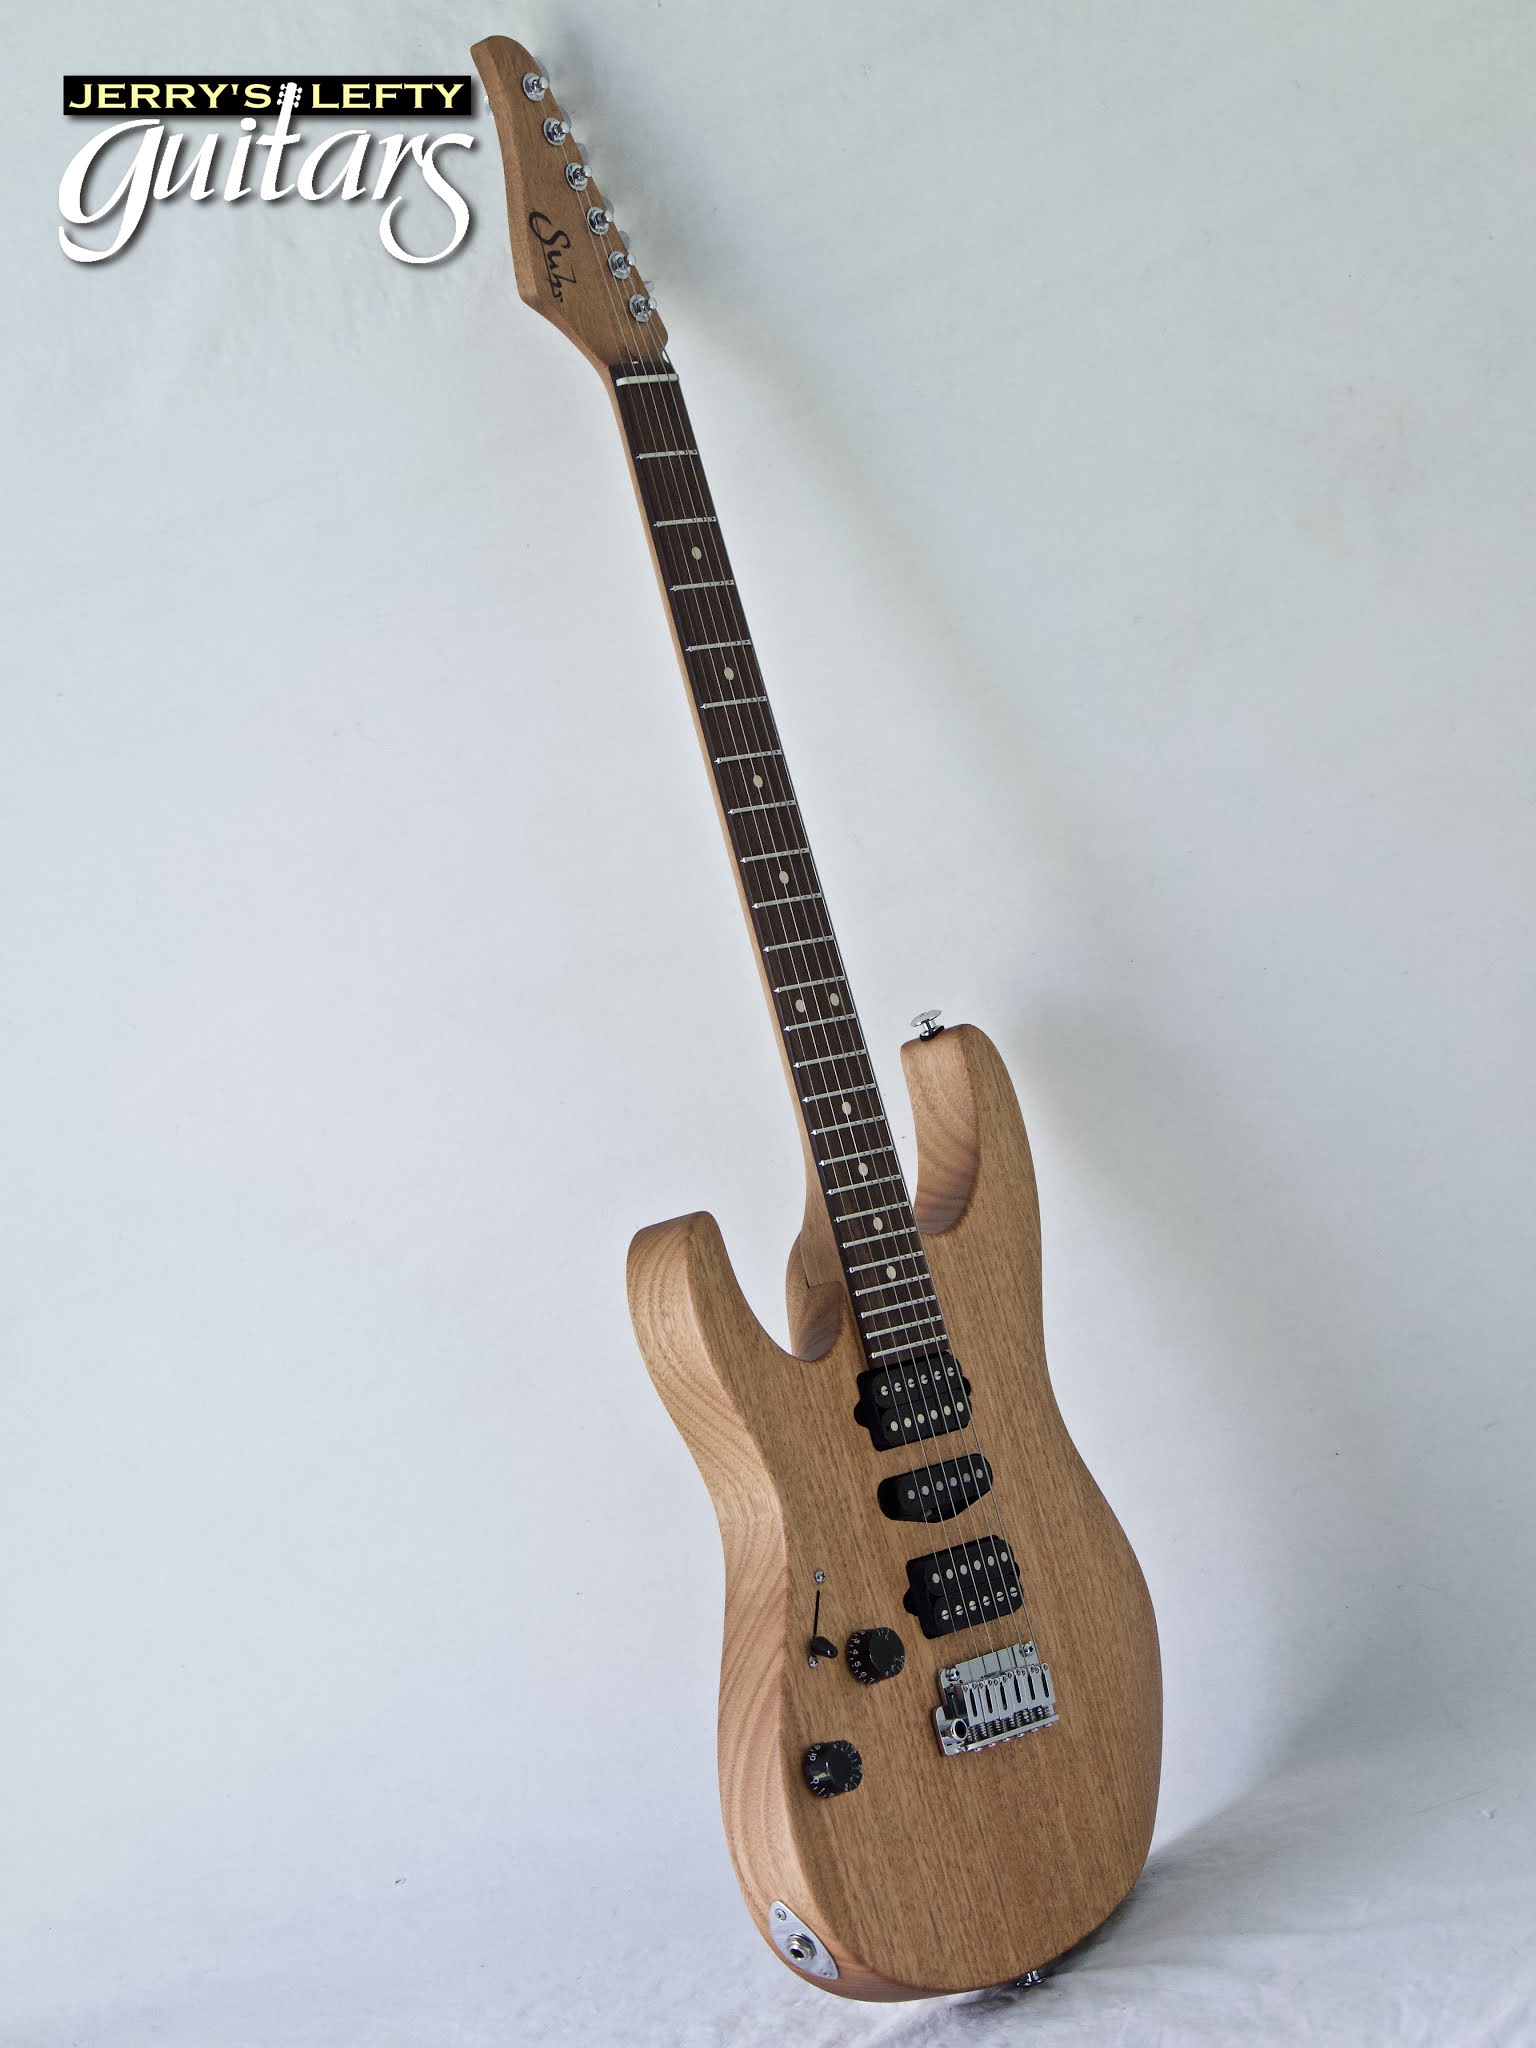 Jerry's Lefty Guitars newest guitar arrivals. Updated weekly!: Suhr